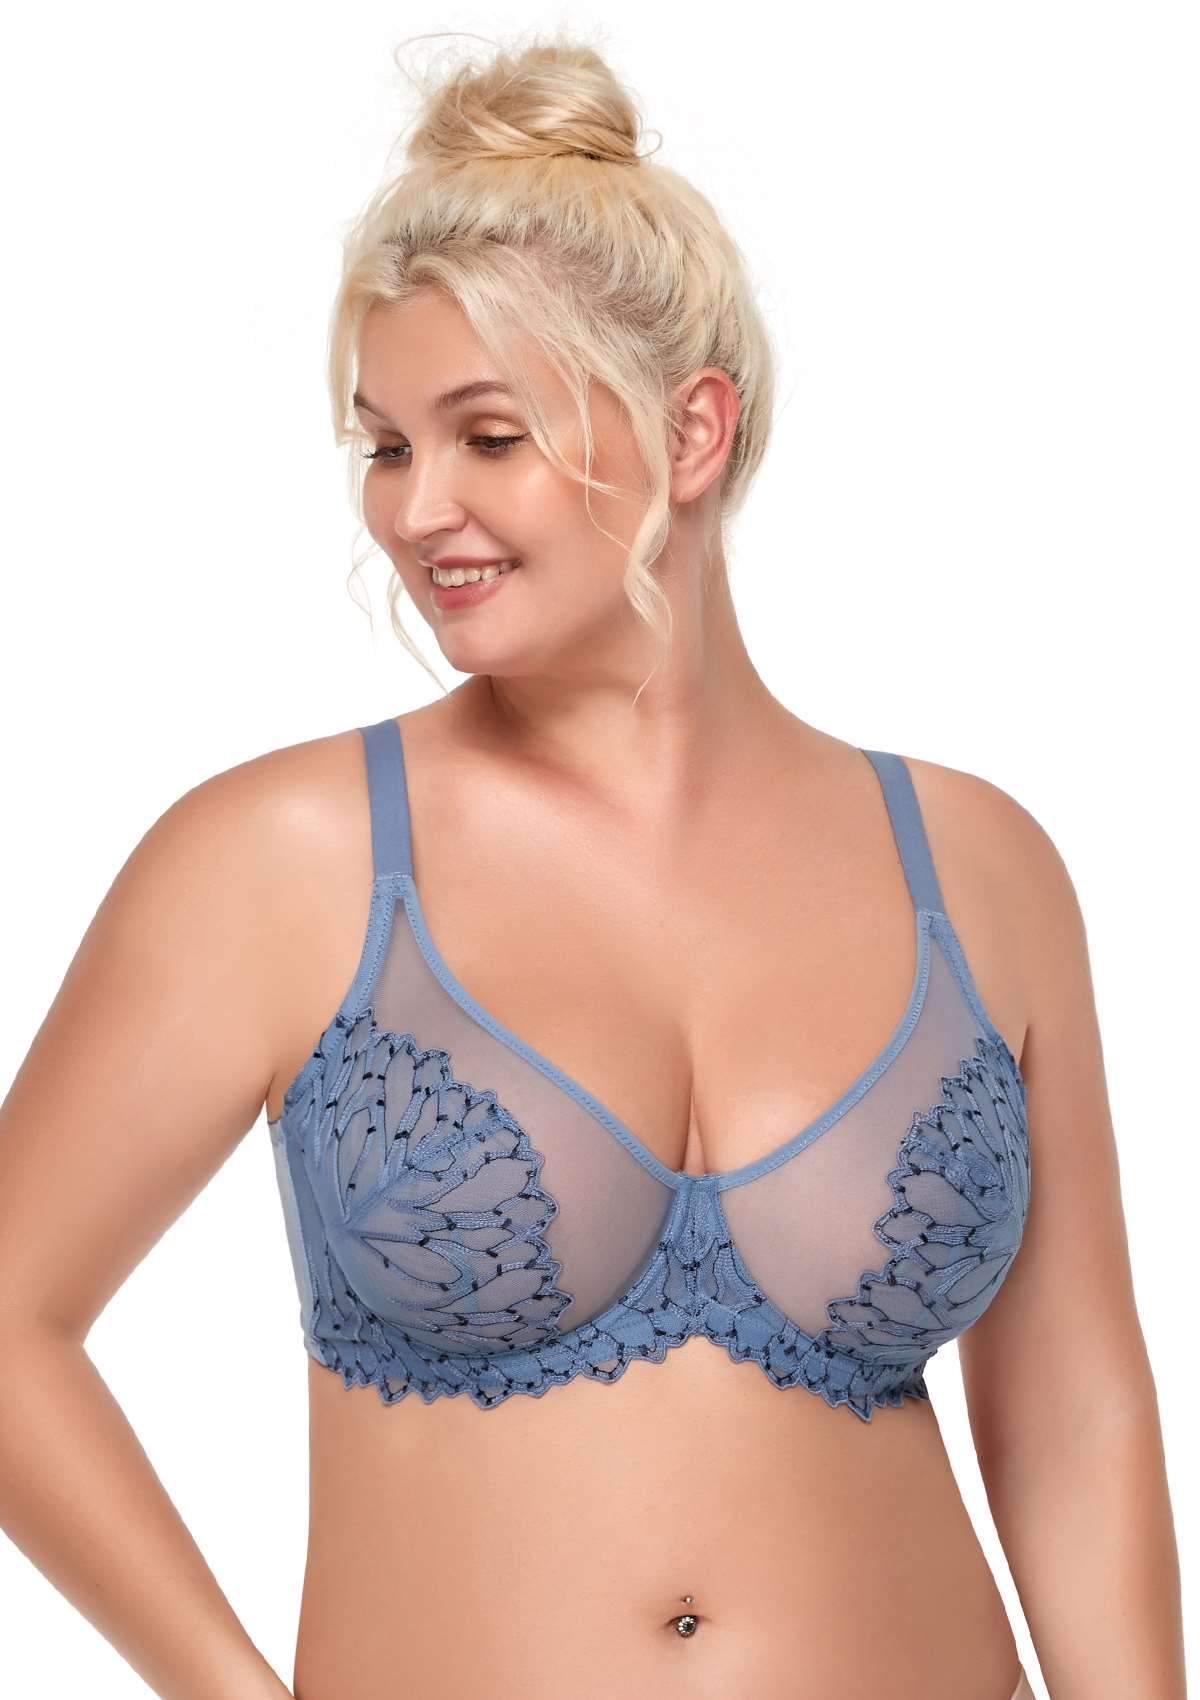 HSIA Chrysanthemum Plus Size Lace Bra: Back Support Bra For Posture - Light Pink / 36 / C